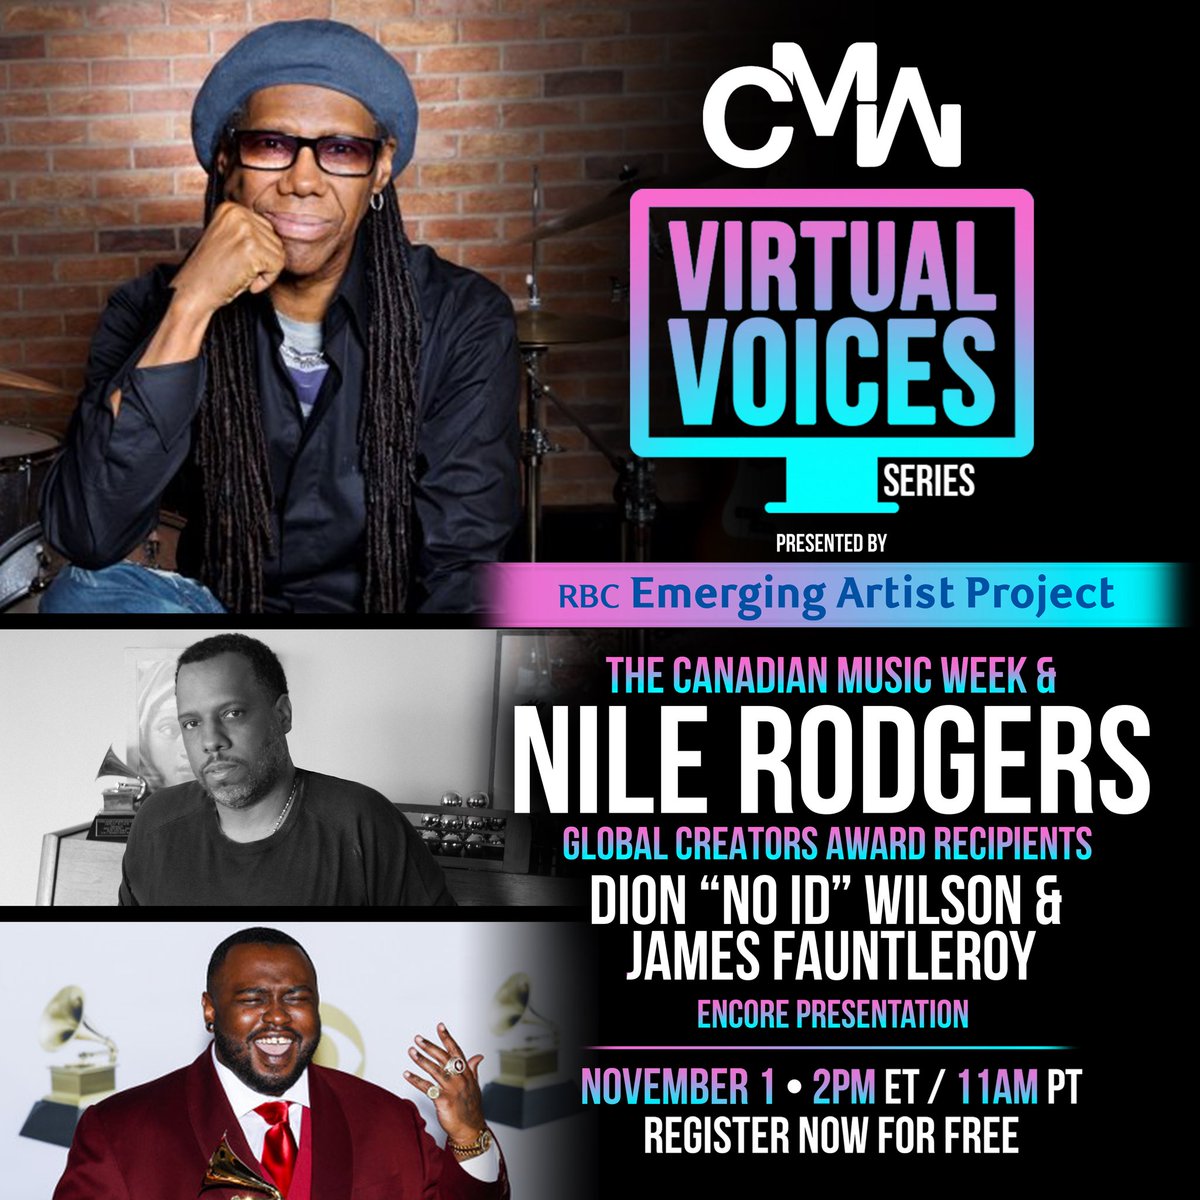 The CMW / Nile Rodgers Global Creators Award was established in 2014 to celebrate the most outstanding of creative geniuses of all ilk who have consistently made an indelible impact on a global scale throughout their careers. Register now for free -> bit.ly/3Td2jiA